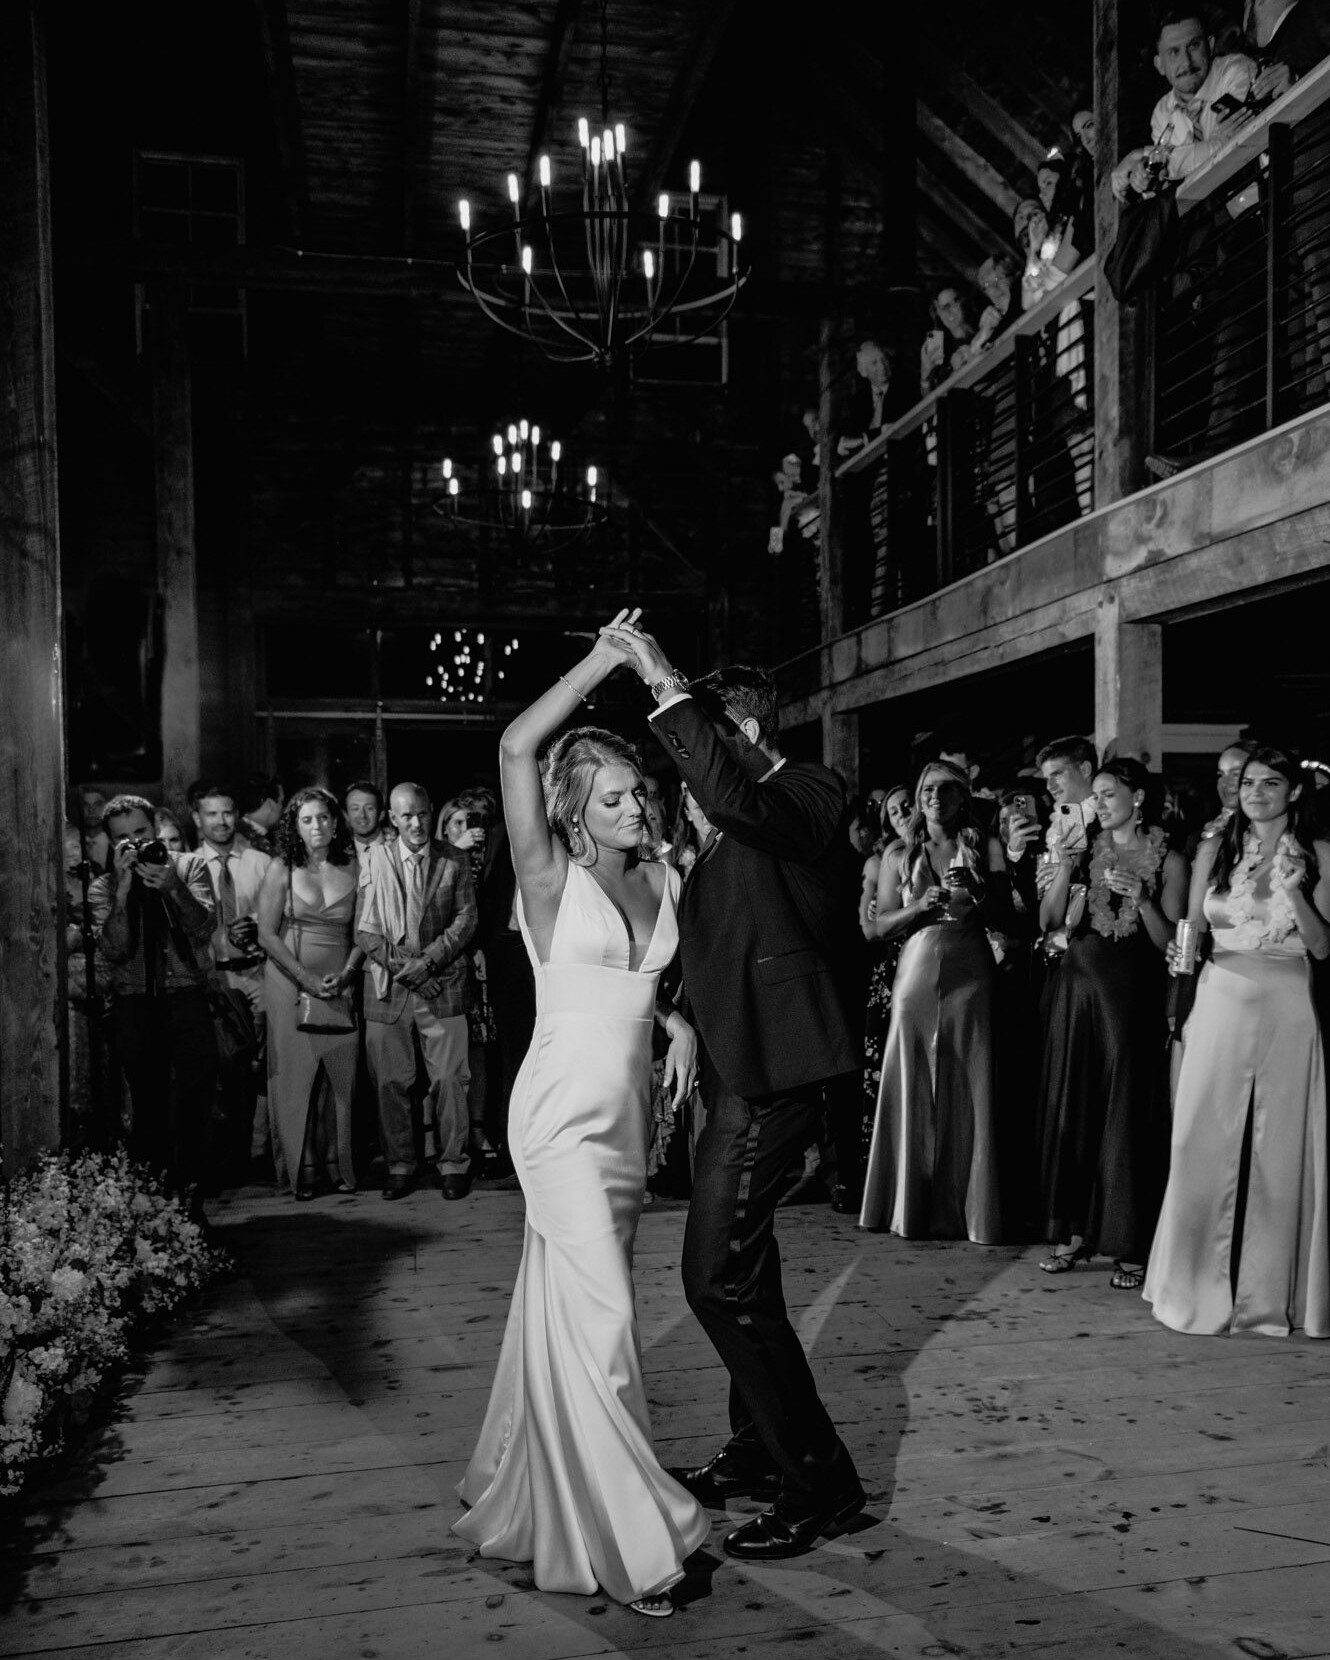 Barn Wedding reception at Scotland Fields in York Maine. Photo of bride and groom during their first dance.